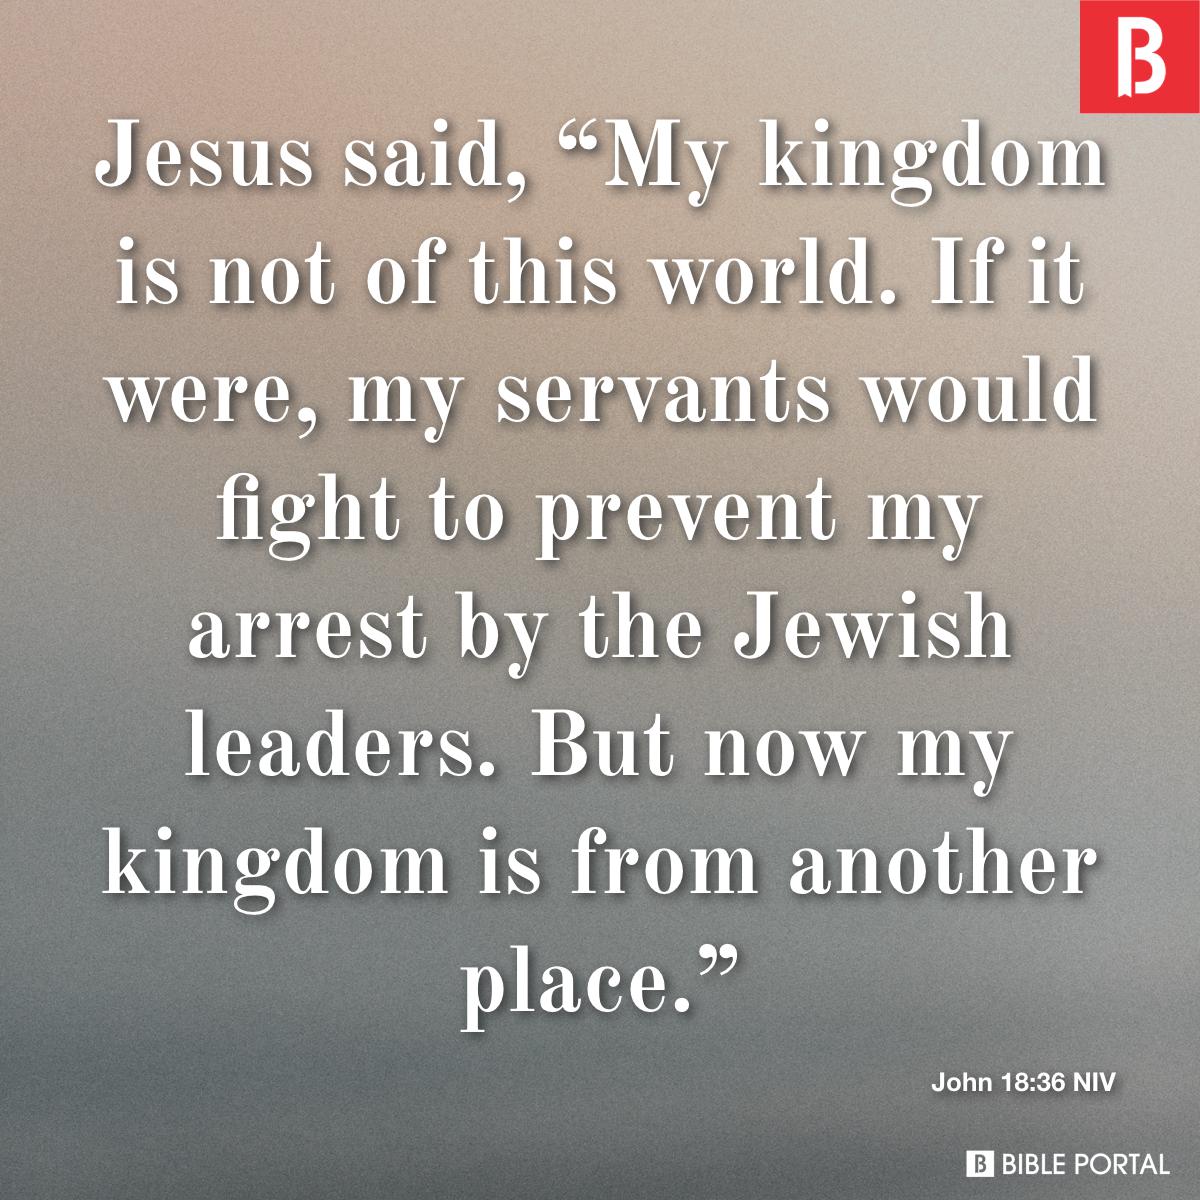 John 18:36 Jesus answered, My kingdom is not of this world; if it were, My  servants would fight to prevent My arrest by the Jews. But now My kingdom  is not of